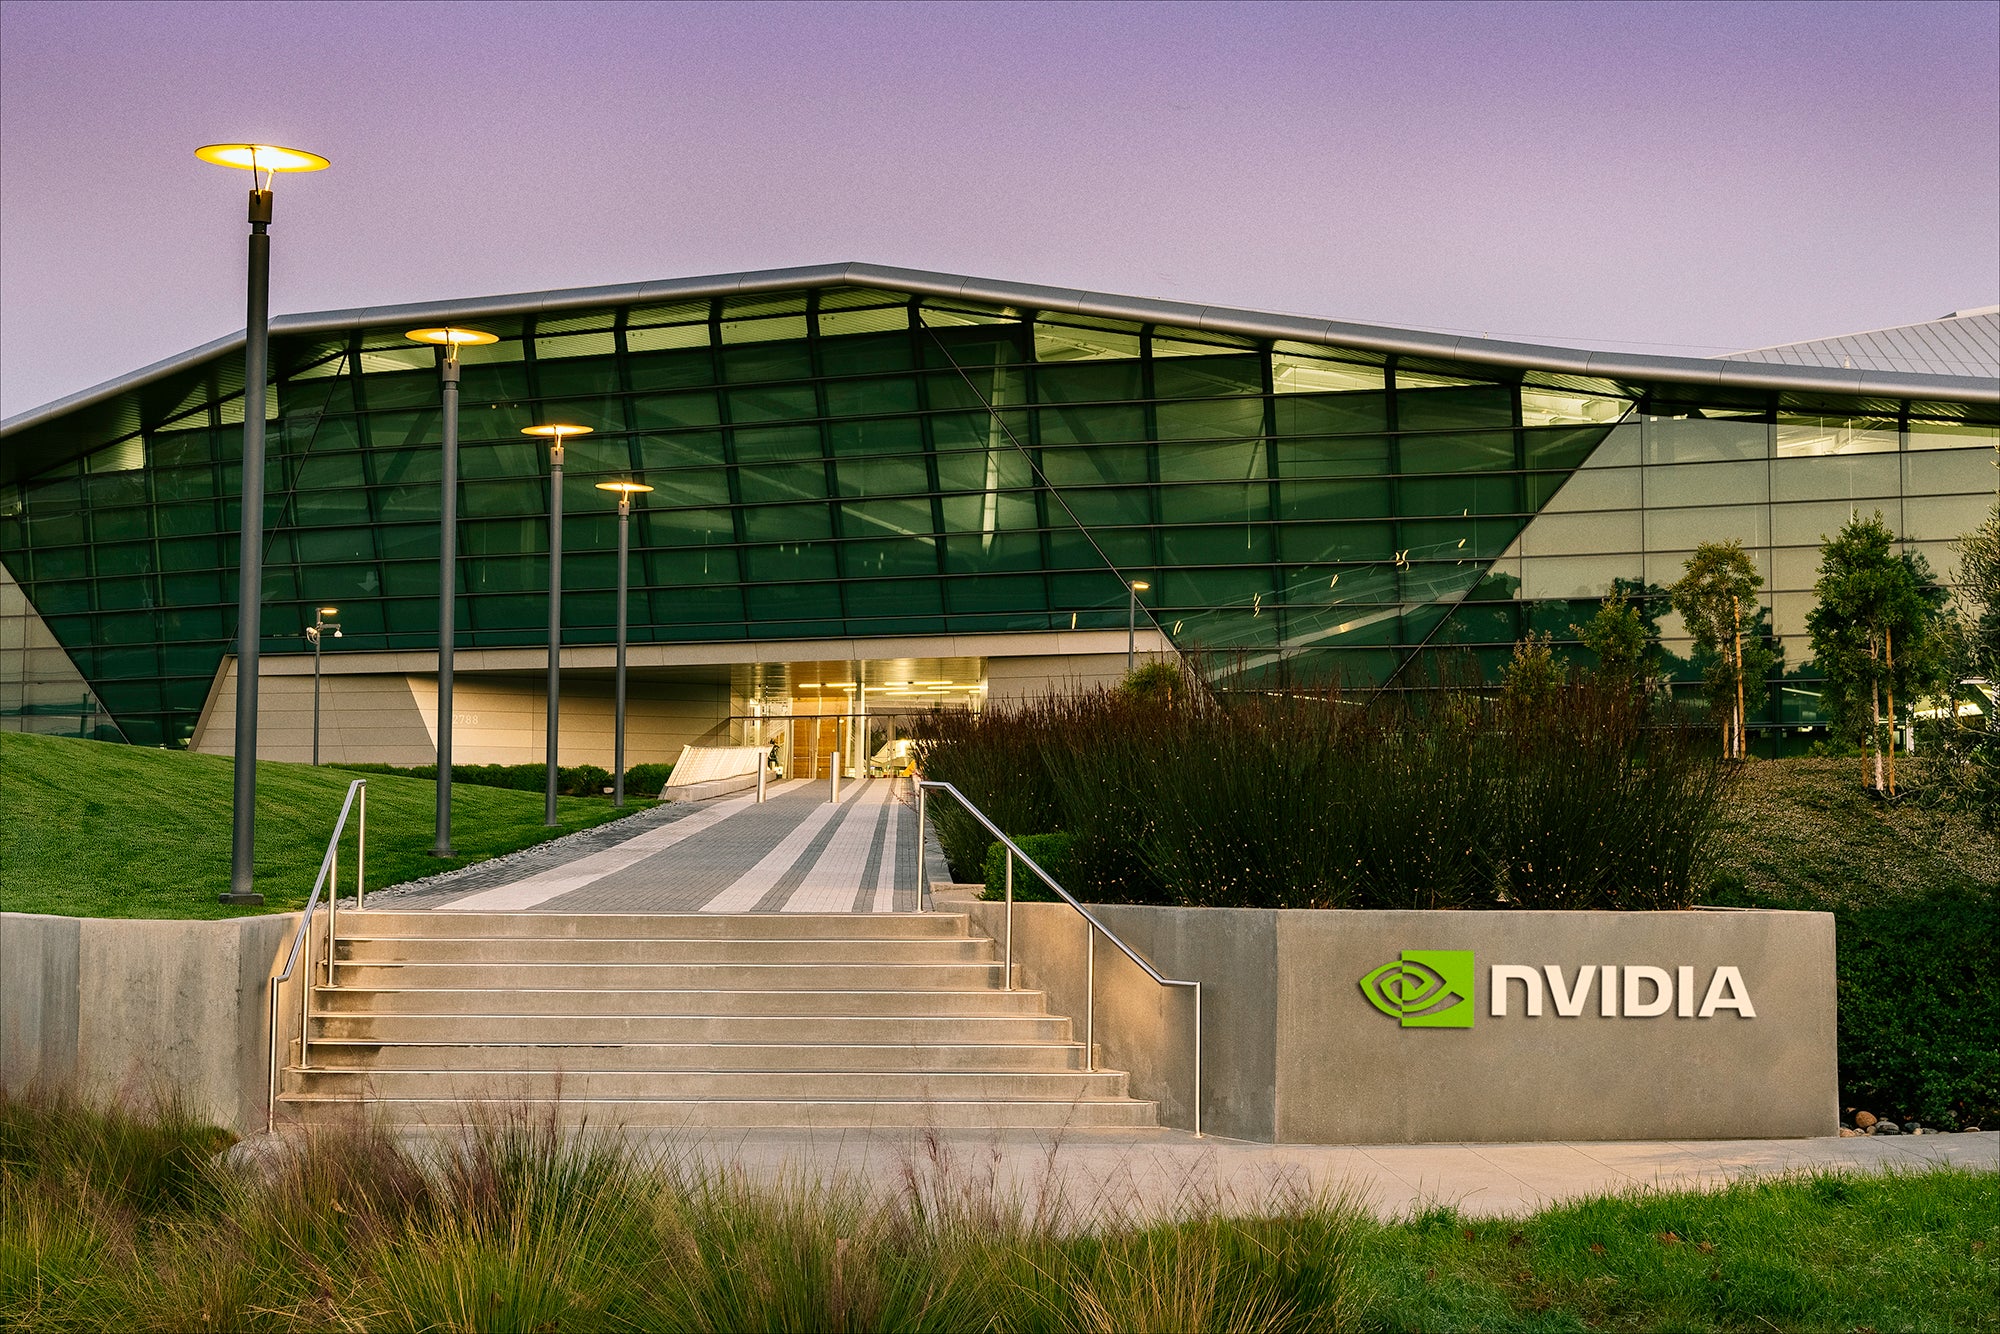 Yet another blow to Nvidia-Arm buy as FTC sues to block, saying deal would “stifle the innovation pipeline”